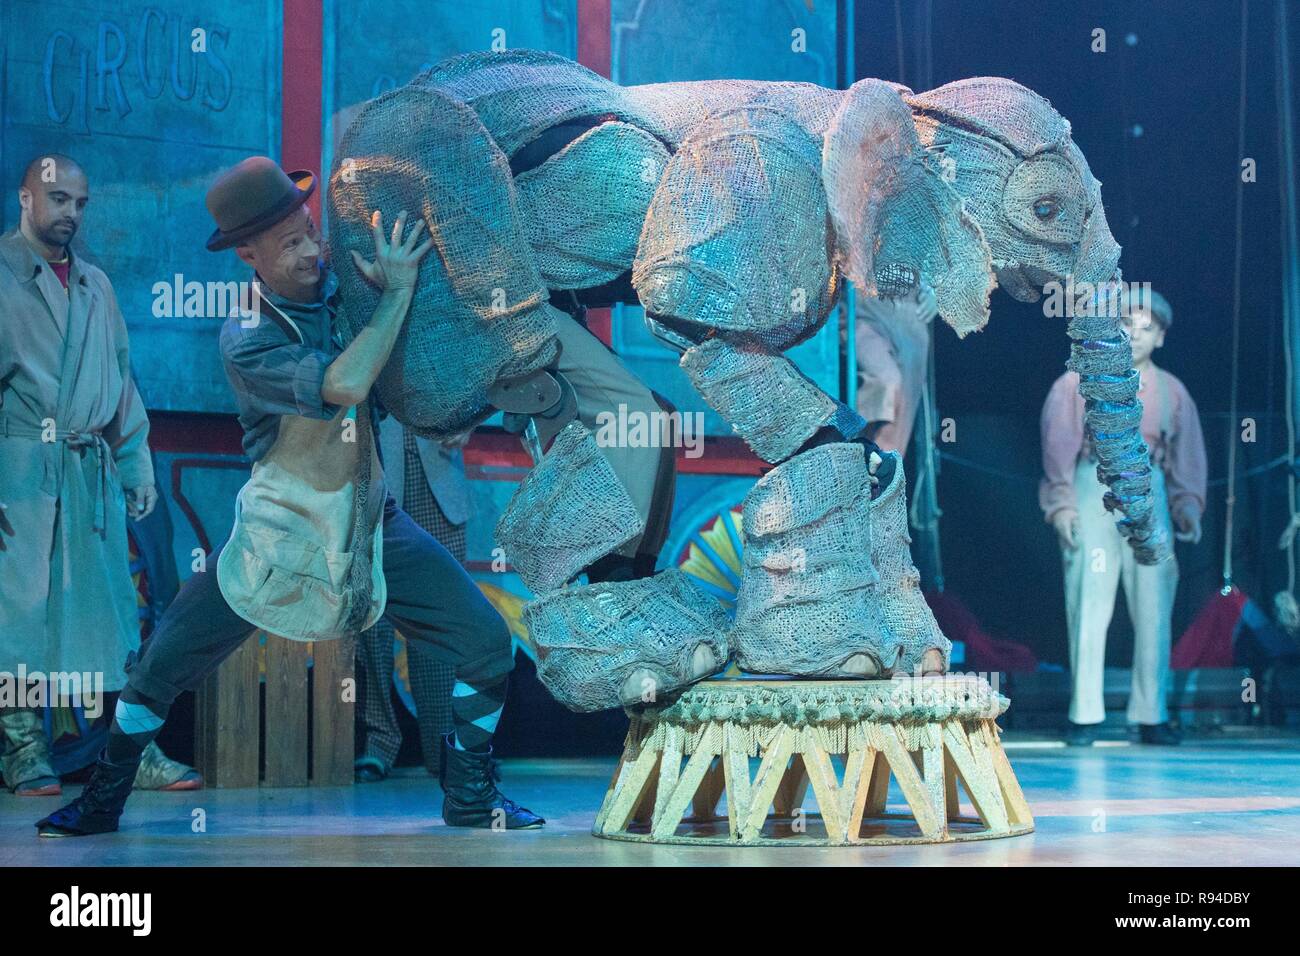 Performers alongside a baby elephant puppet during a photocall ahead of the opening night of Circus 1903, which features life-sized elephants created by puppeteers from War Horse, acrobats, contortionists, jugglers, trapeze and high wire performers, at the Royal Festival Hall, London. Stock Photo